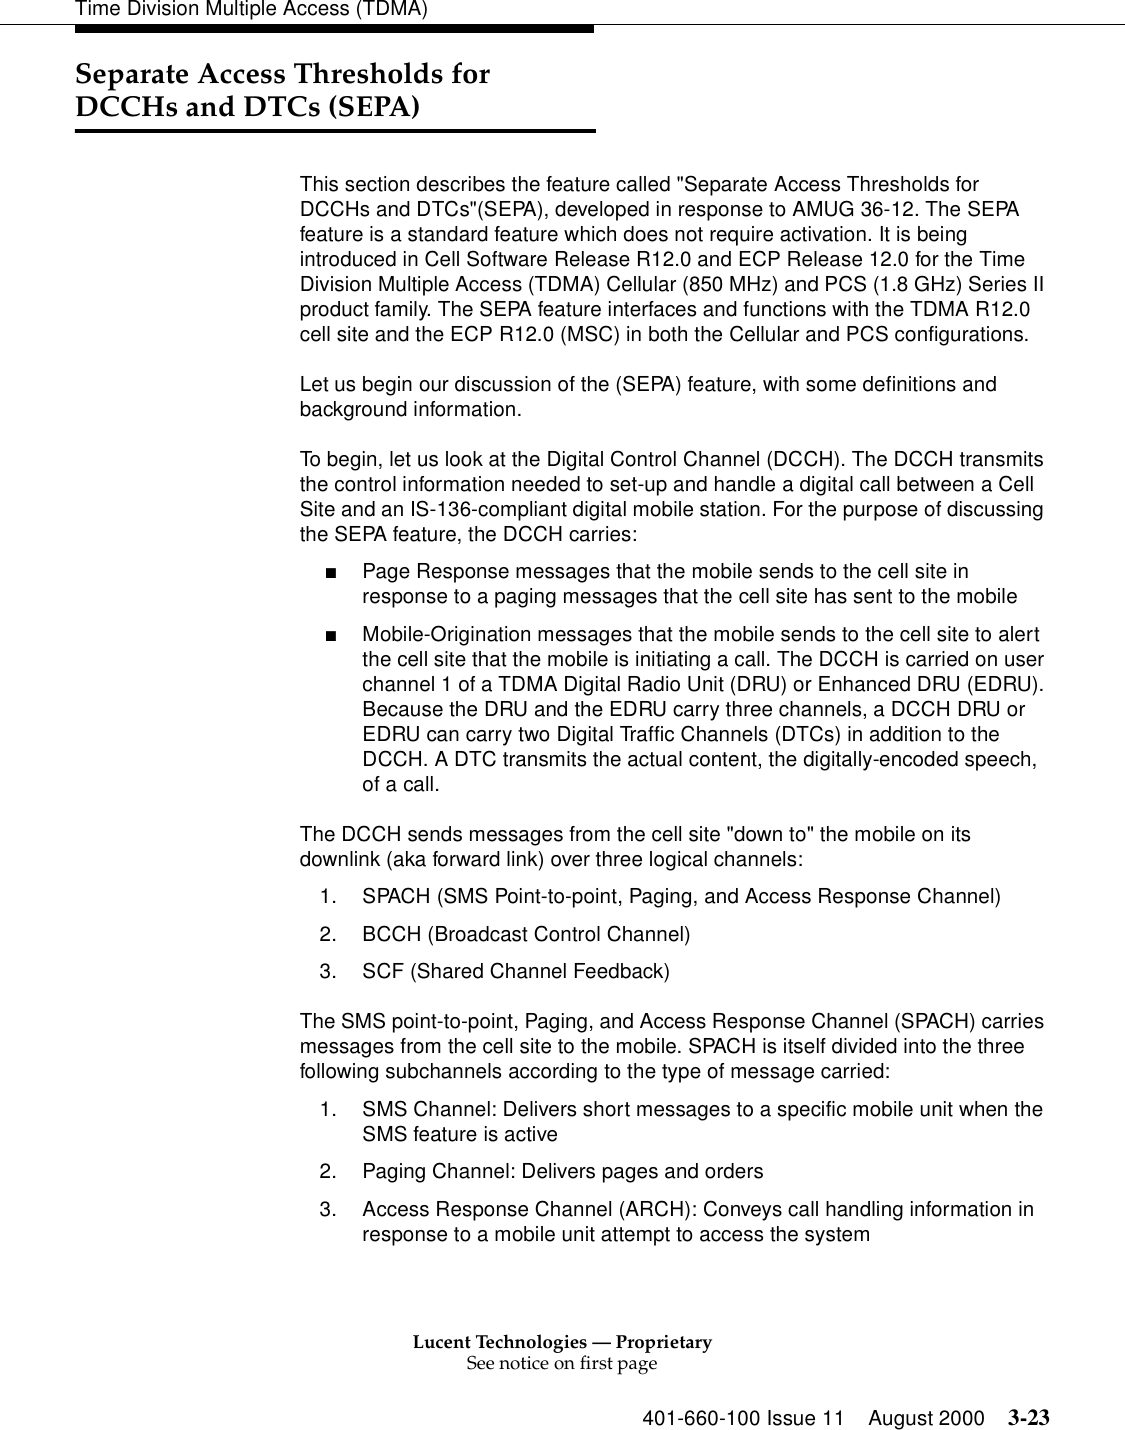 Lucent Technologies — ProprietarySee notice on first page401-660-100 Issue 11 August 2000 3-23Time Division Multiple Access (TDMA)Separate Access Thresholds for DCCHs and DTCs (SEPA)This section describes the feature called &quot;Separate Access Thresholds for DCCHs and DTCs&quot;(SEPA), developed in response to AMUG 36-12. The SEPA feature is a standard feature which does not require activation. It is being introduced in Cell Software Release R12.0 and ECP Release 12.0 for the Time Division Multiple Access (TDMA) Cellular (850 MHz) and PCS (1.8 GHz) Series II product family. The SEPA feature interfaces and functions with the TDMA R12.0 cell site and the ECP R12.0 (MSC) in both the Cellular and PCS configurations. Let us begin our discussion of the (SEPA) feature, with some definitions and background information. To begin, let us look at the Digital Control Channel (DCCH). The DCCH transmits the control information needed to set-up and handle a digital call between a Cell Site and an IS-136-compliant digital mobile station. For the purpose of discussing the SEPA feature, the DCCH carries: ■Page Response messages that the mobile sends to the cell site in response to a paging messages that the cell site has sent to the mobile ■Mobile-Origination messages that the mobile sends to the cell site to alert the cell site that the mobile is initiating a call. The DCCH is carried on user channel 1 of a TDMA Digital Radio Unit (DRU) or Enhanced DRU (EDRU). Because the DRU and the EDRU carry three channels, a DCCH DRU or EDRU can carry two Digital Traffic Channels (DTCs) in addition to the DCCH. A DTC transmits the actual content, the digitally-encoded speech, of a call. The DCCH sends messages from the cell site &quot;down to&quot; the mobile on its downlink (aka forward link) over three logical channels: 1. SPACH (SMS Point-to-point, Paging, and Access Response Channel) 2. BCCH (Broadcast Control Channel) 3. SCF (Shared Channel Feedback) The SMS point-to-point, Paging, and Access Response Channel (SPACH) carries messages from the cell site to the mobile. SPACH is itself divided into the three following subchannels according to the type of message carried: 1. SMS Channel: Delivers short messages to a specific mobile unit when the SMS feature is active2. Paging Channel: Delivers pages and orders3. Access Response Channel (ARCH): Conveys call handling information in response to a mobile unit attempt to access the system